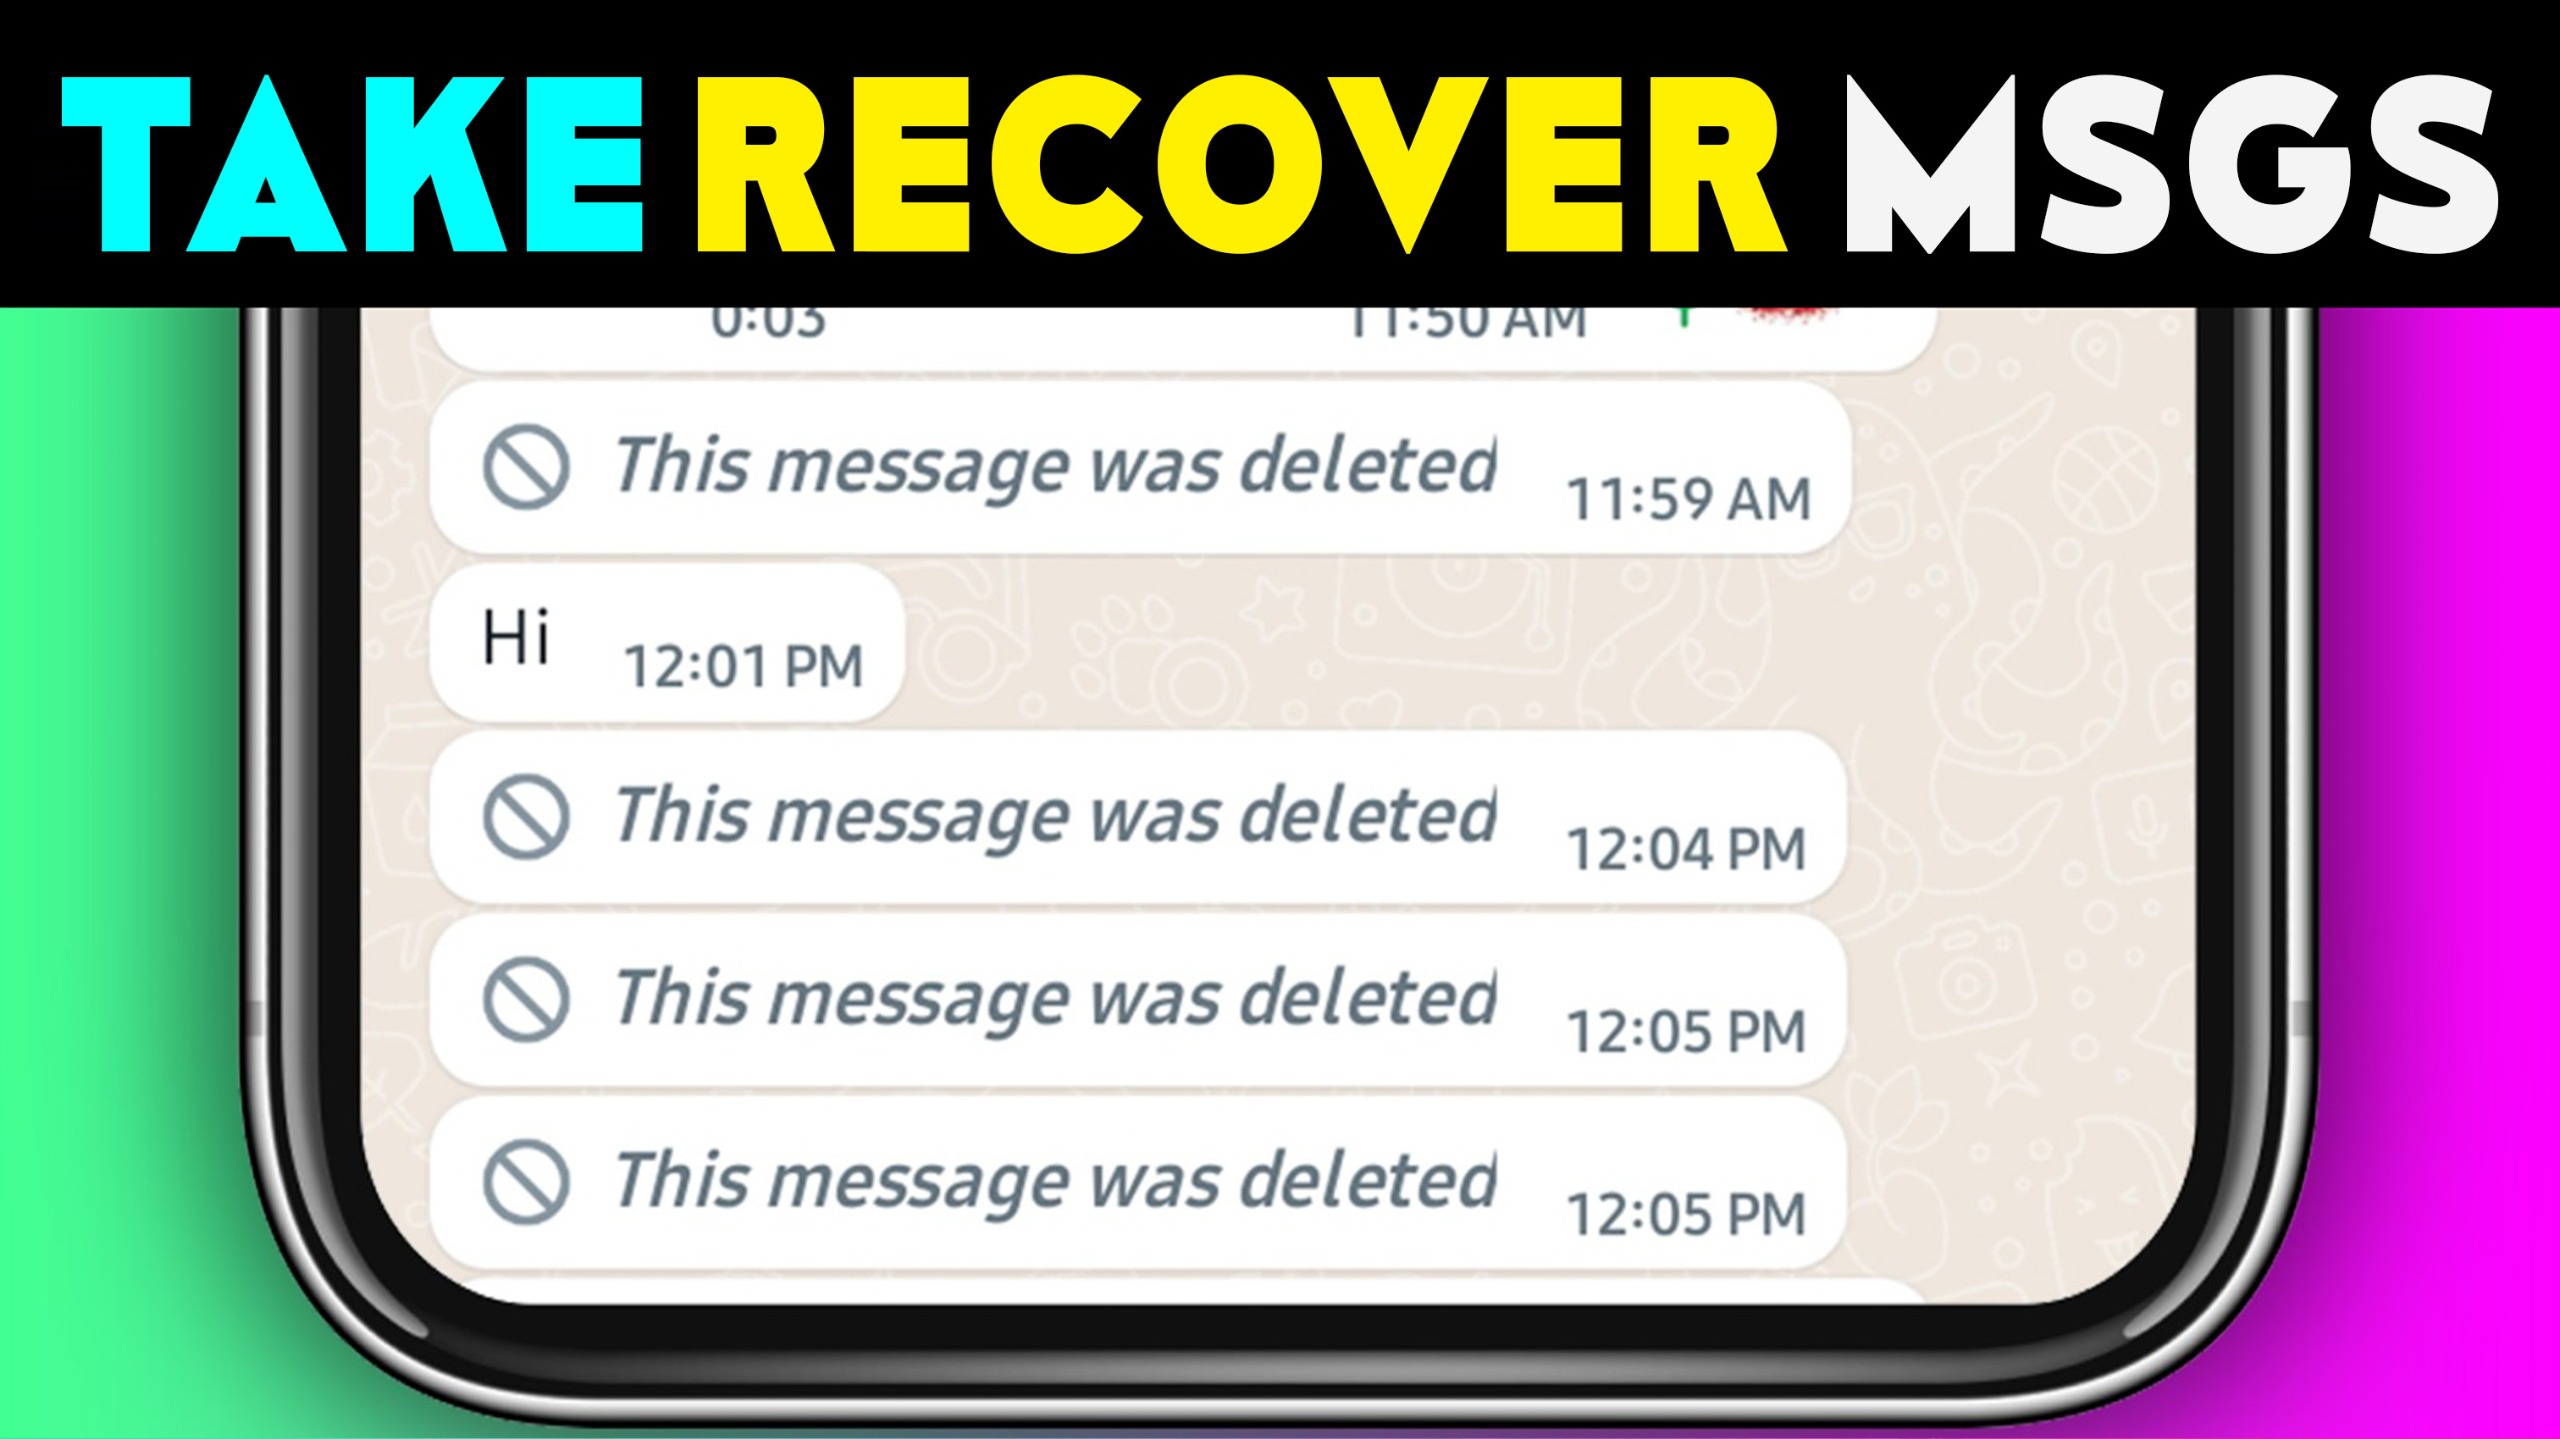 Whatsapp deleted messages recover app